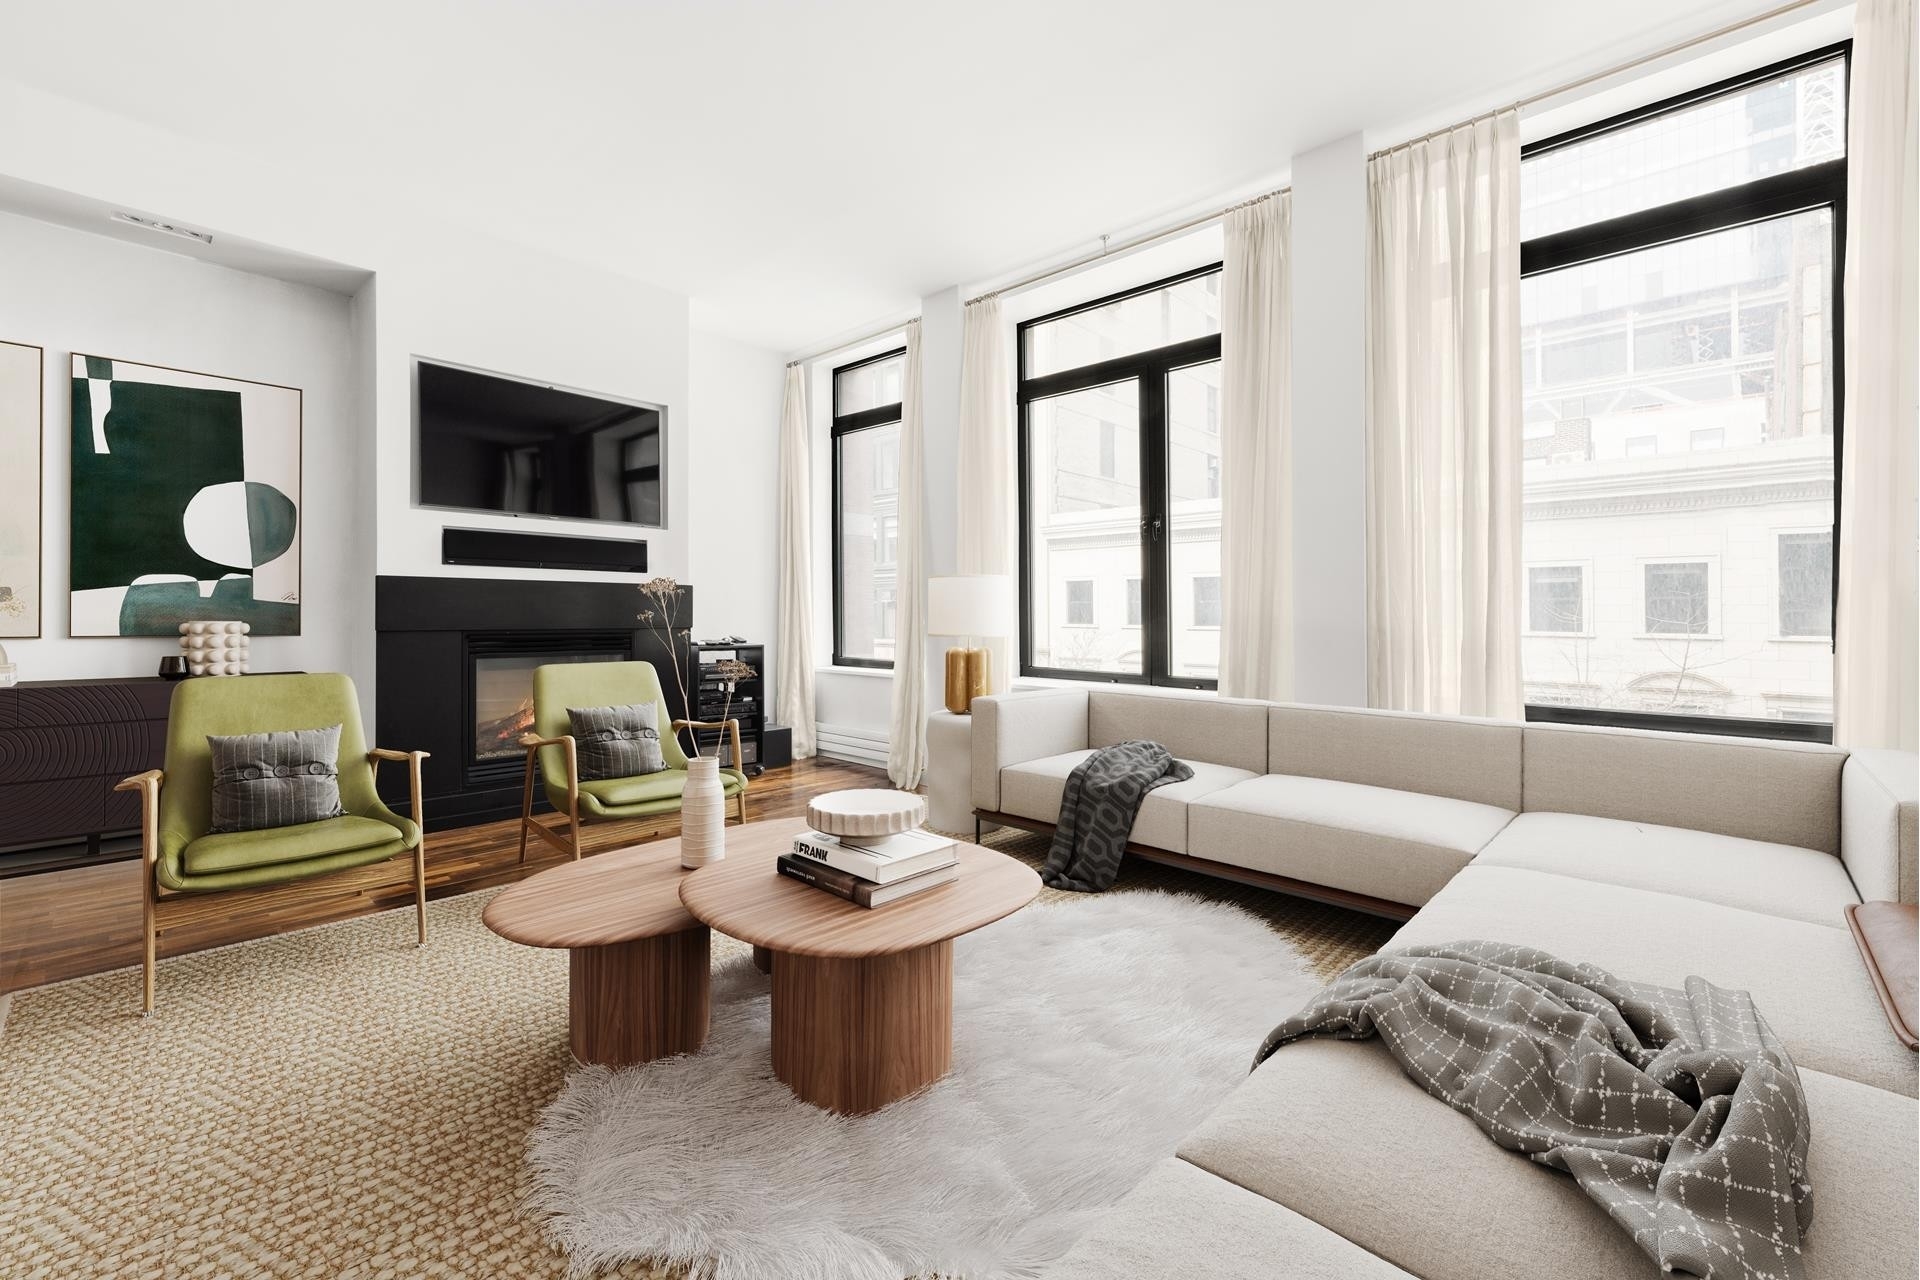 Condominium for Sale at The Story House, 36 E 22ND ST, 4A Flatiron District, New York, NY 10010